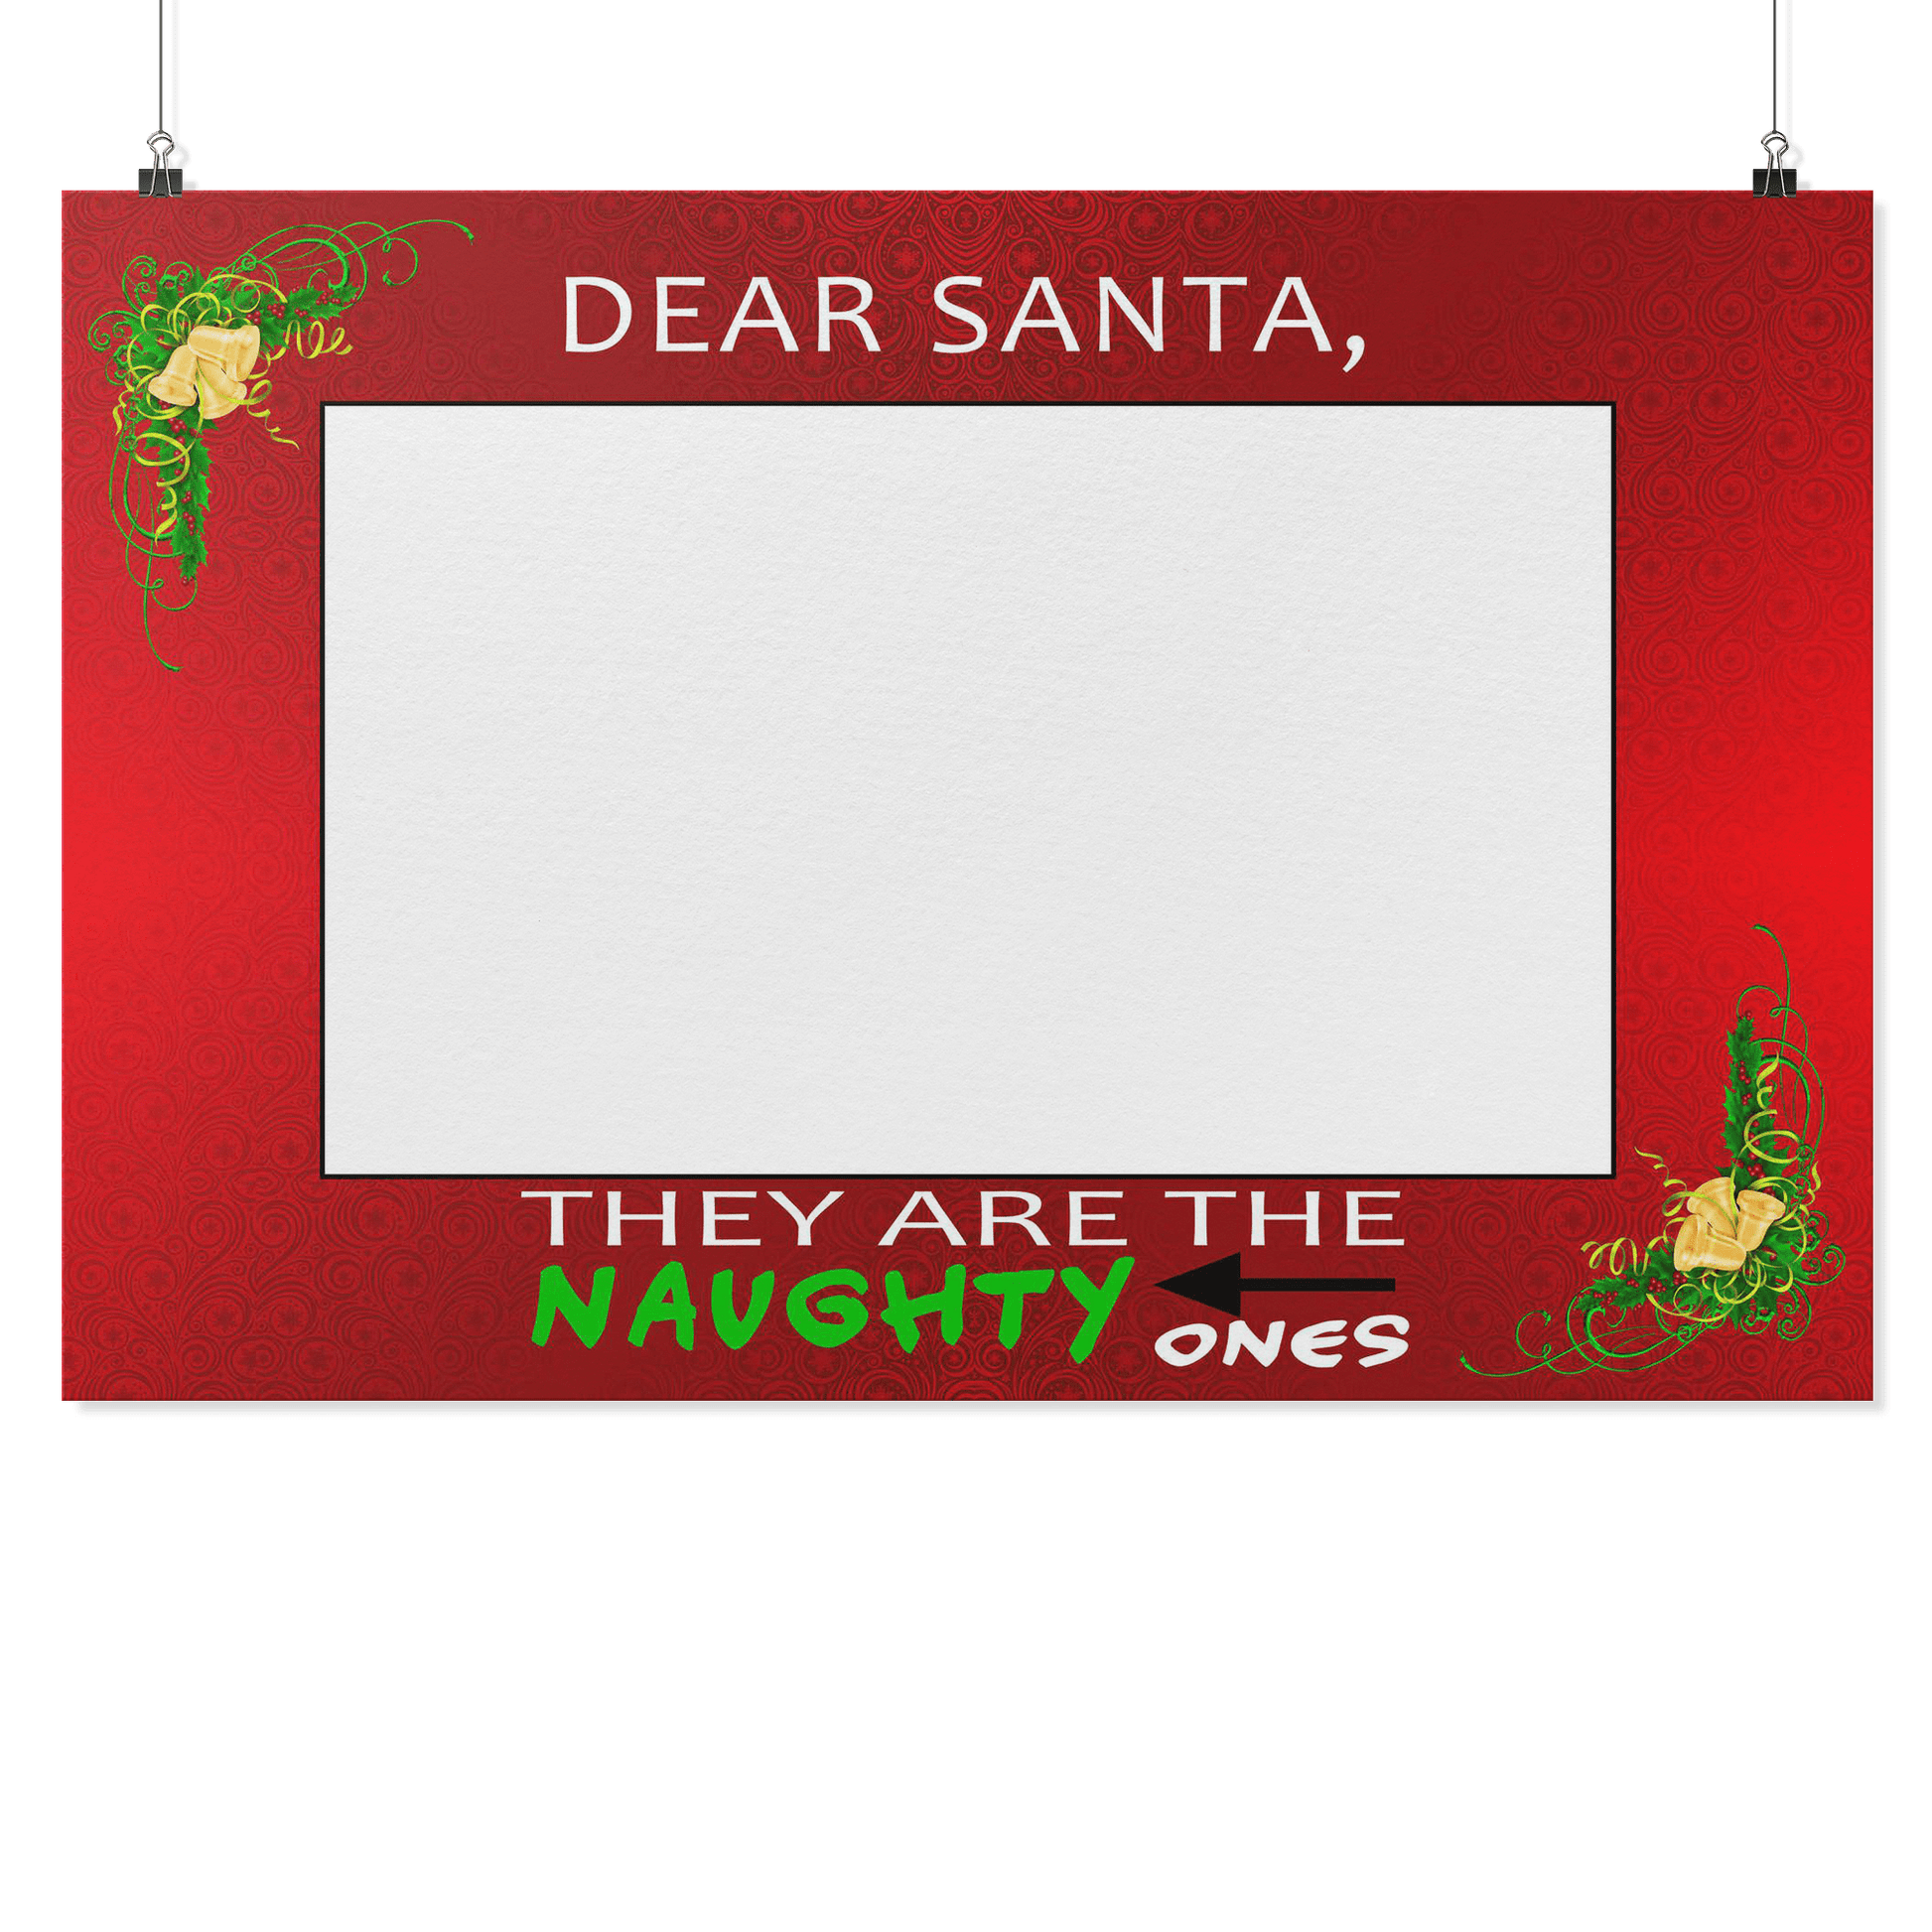 Dear Santa, They are the naughty ones! | Santa's Naughty List Photo Prop Frame | Santa Claus-Posters-TD Gift Solutions.com